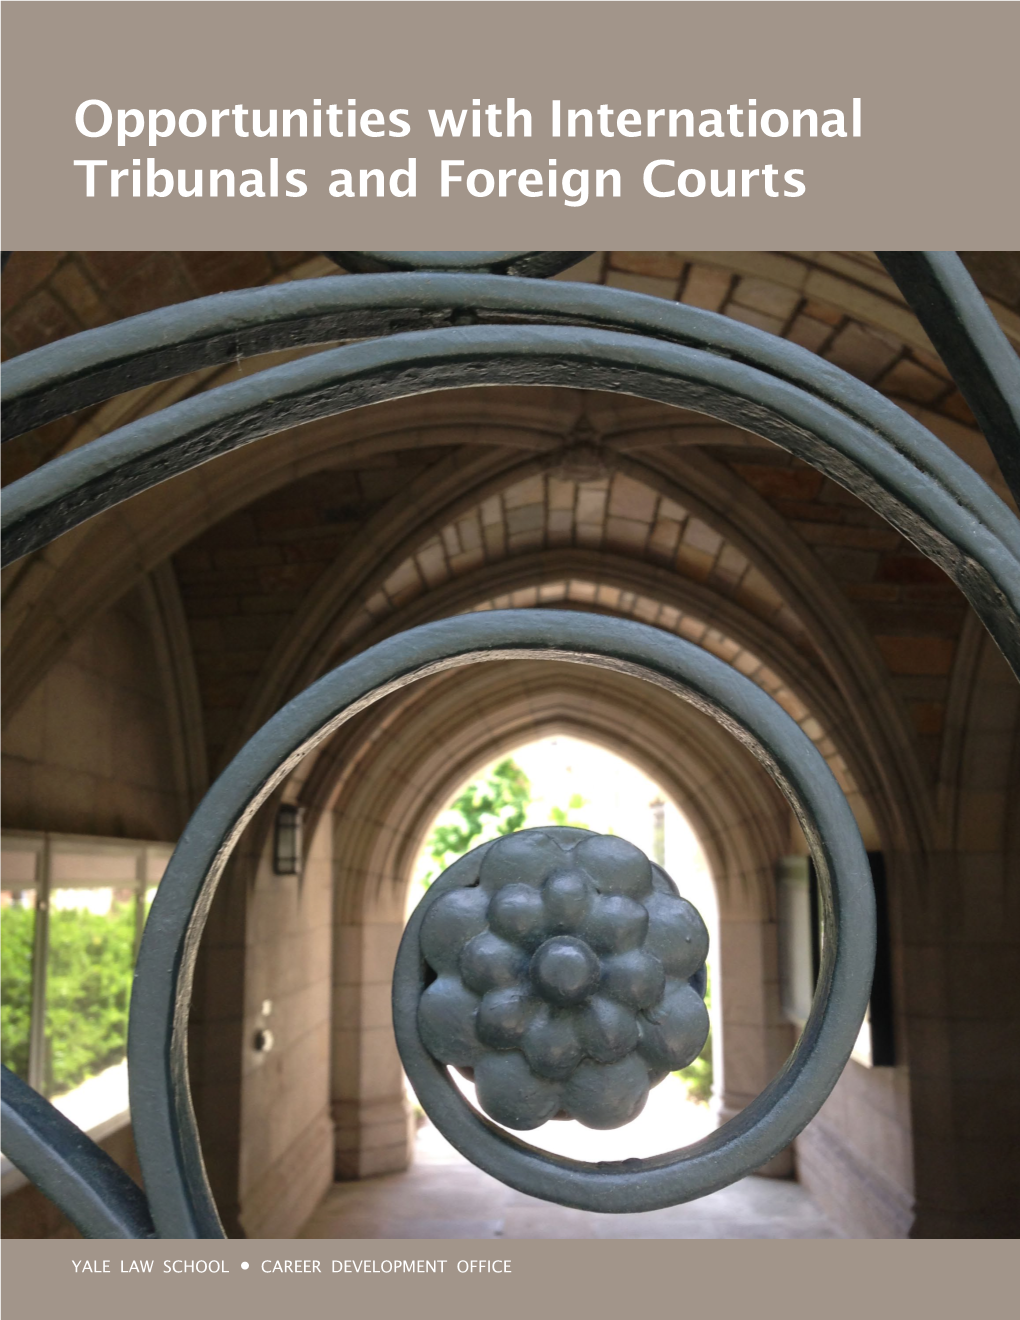 Opportunities with International Tribunals and Foreign Courts